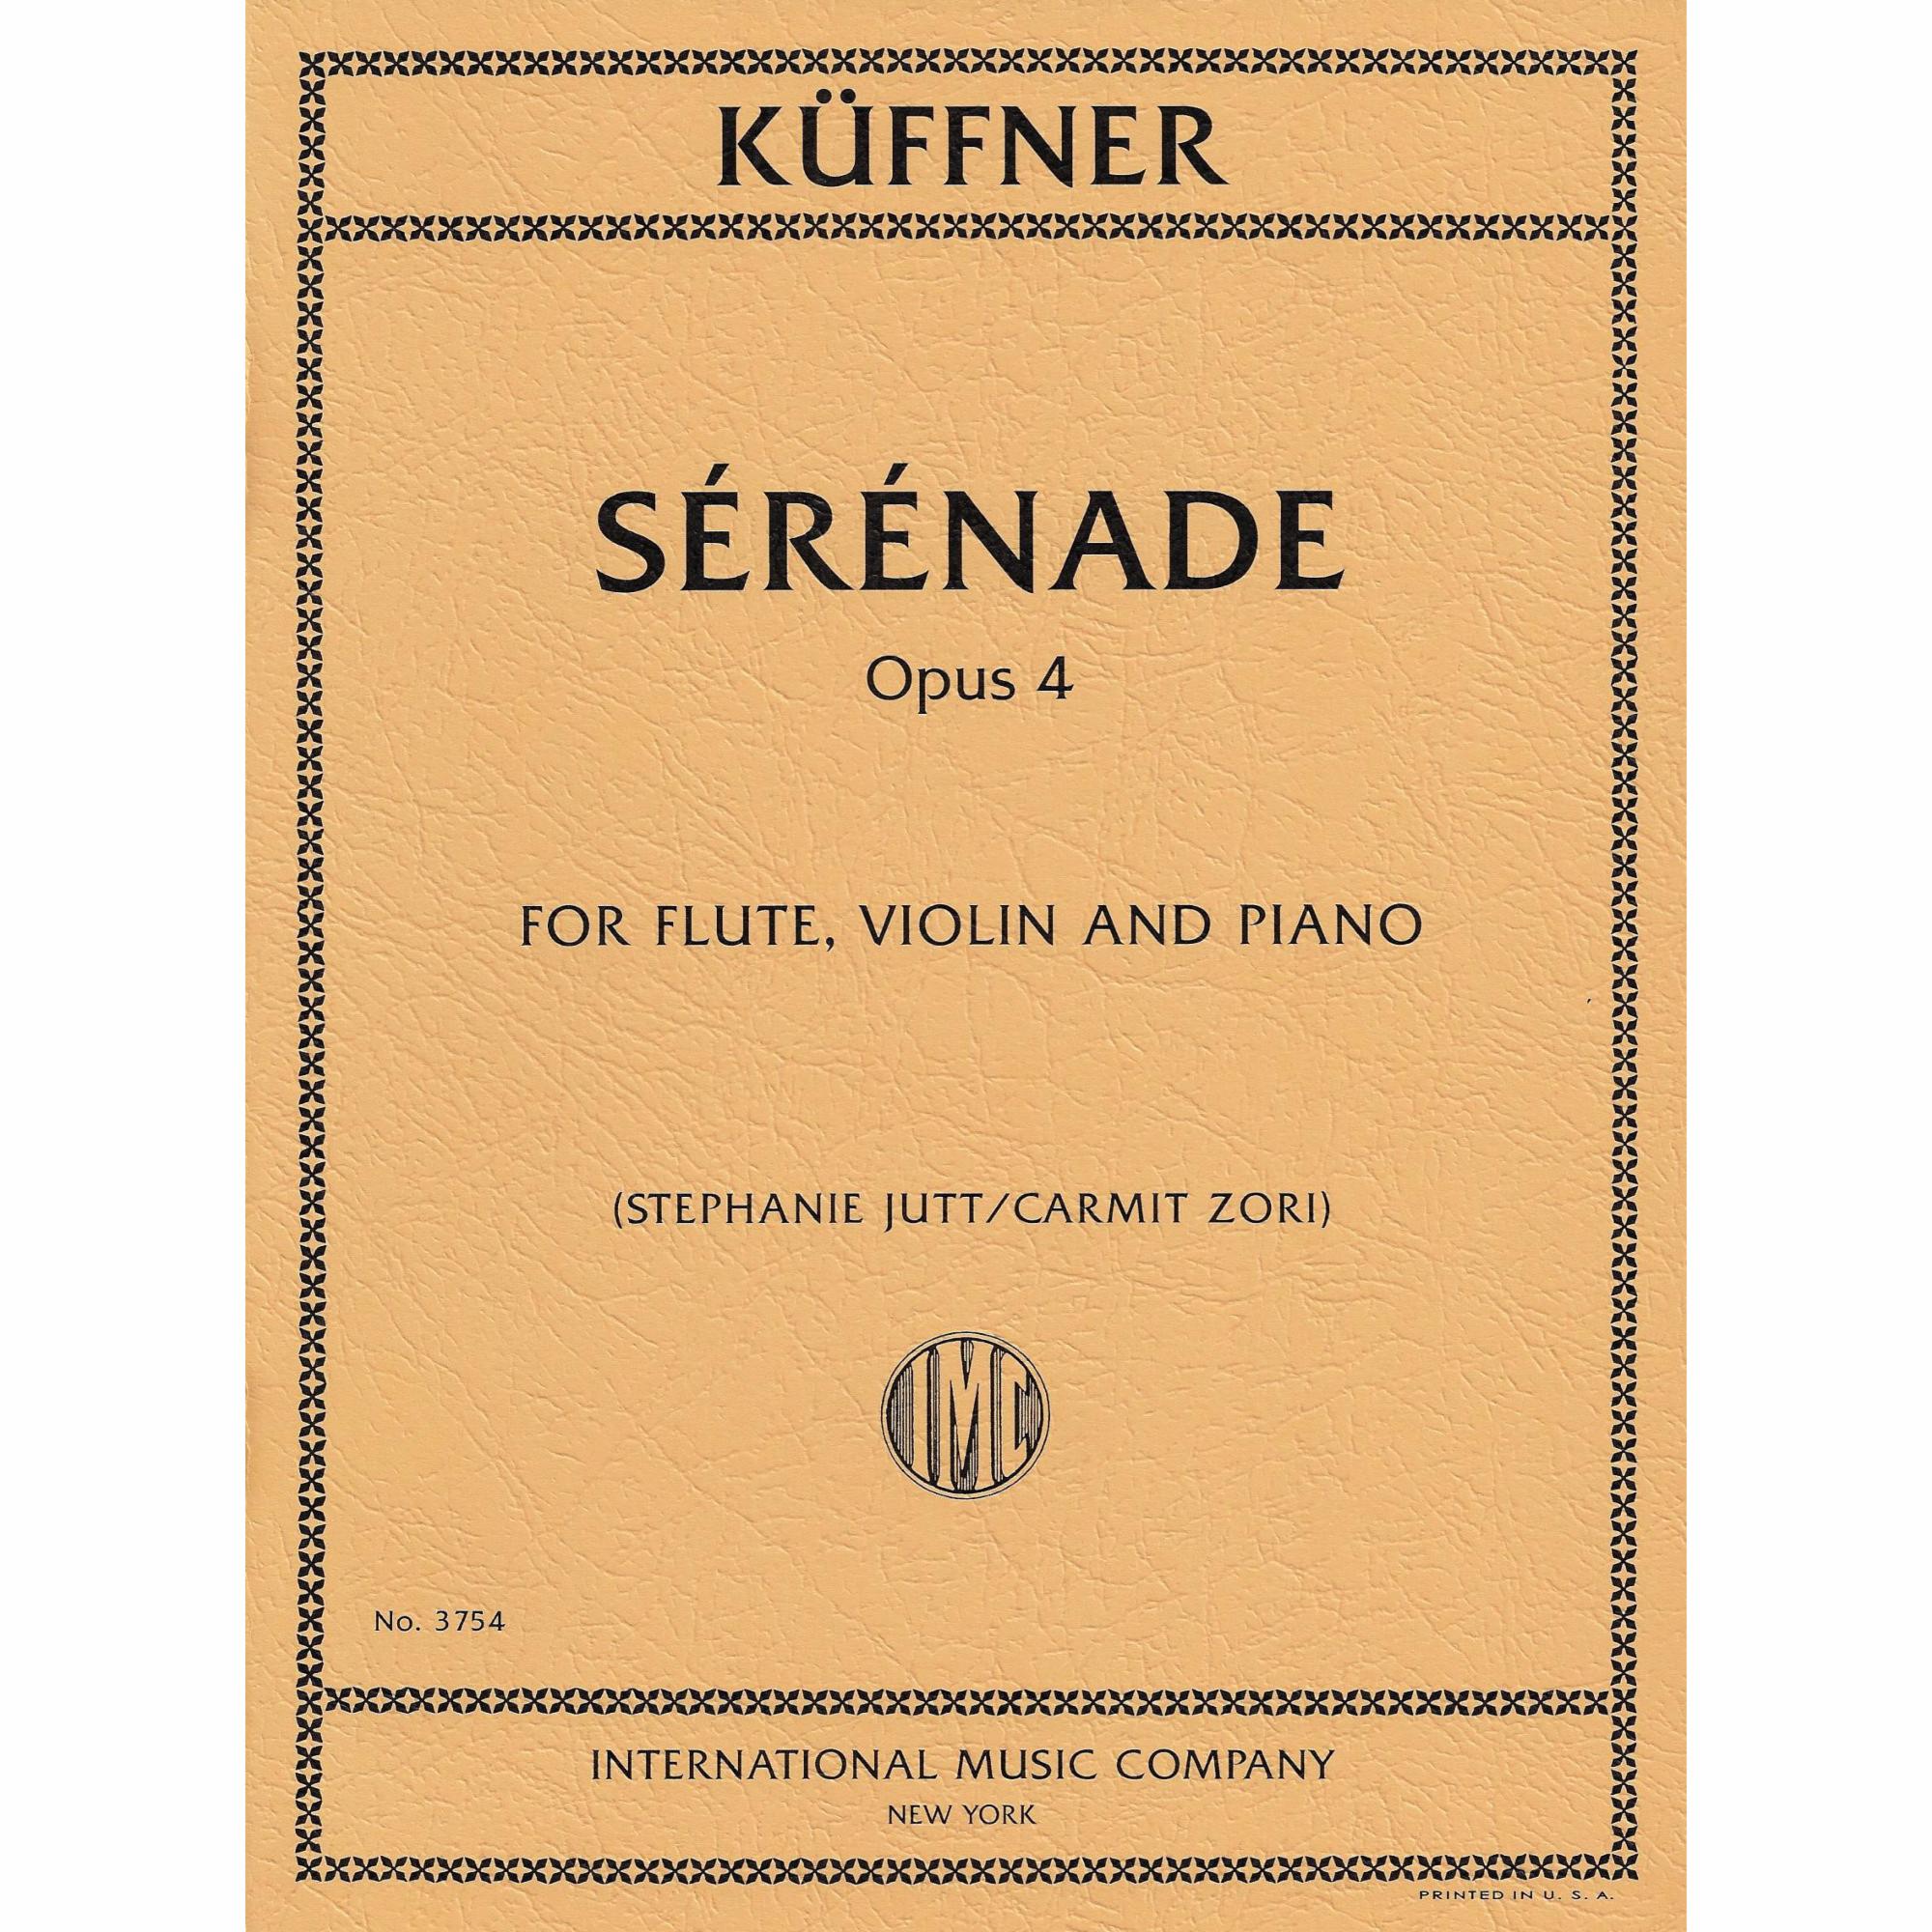 Kuffner -- Serenade, Op. 4 for Flute, Violin, and Piano